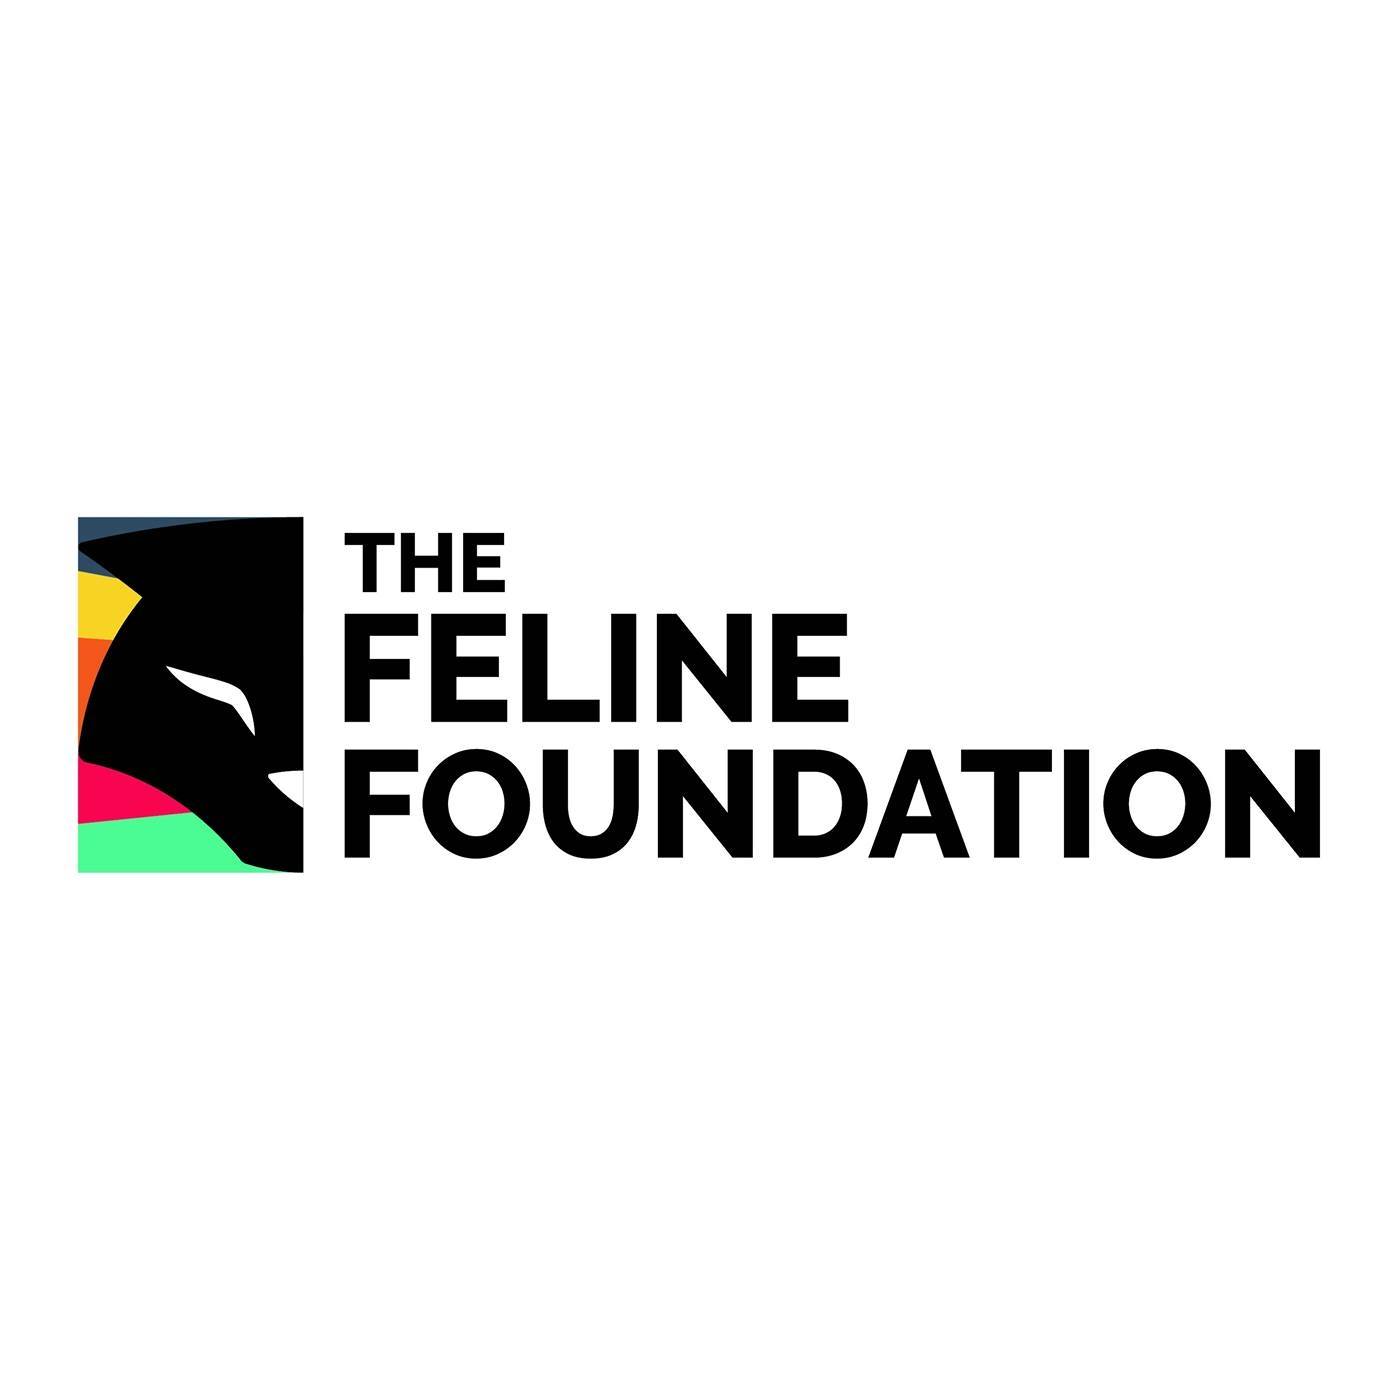 The Feline Foundation Community Veterinary Clinic and Pet Store|Clinics|Medical Services